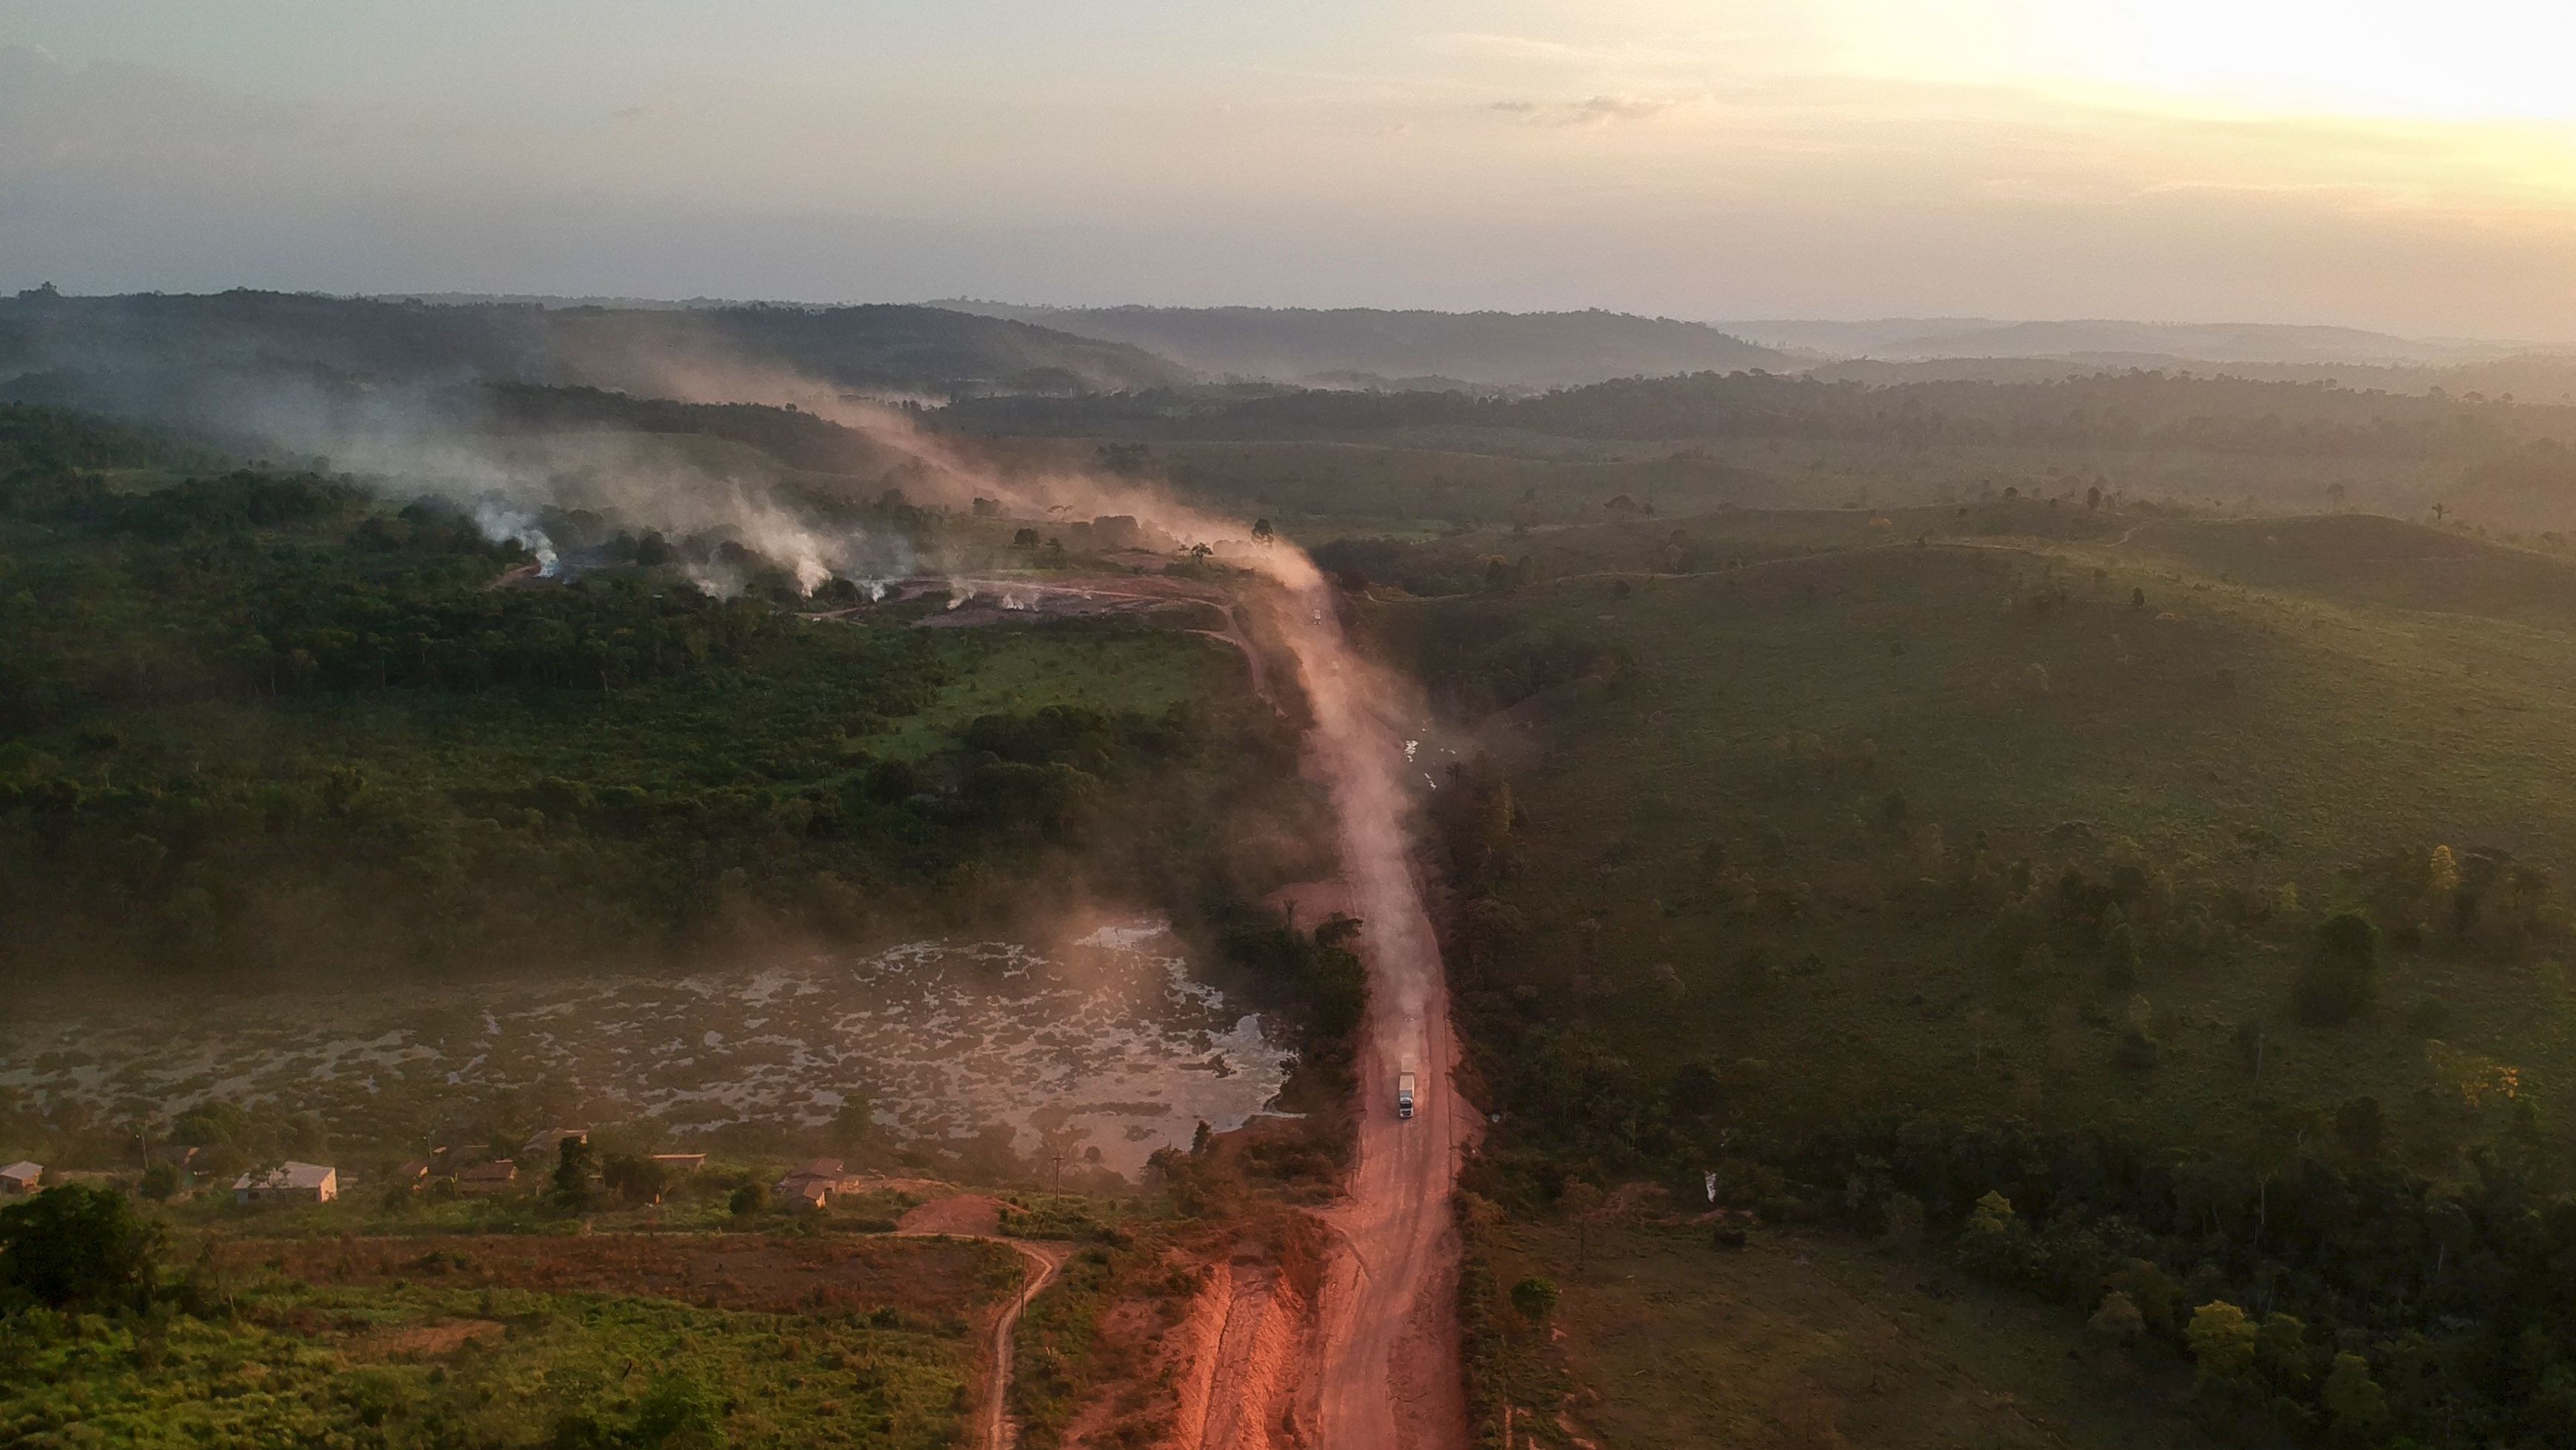 TOPSHOT - In this aerial view the red dust of the BR230 highway, known as "Transamazonica", mixes with fires at sunset in the agriculture town of Ruropolis, Para state, northen Brazil, on September 6, 2019. - Presidents and ministers from seven Amazon countries met in Colombia on Friday to agree on  measures to protect the world's biggest rainforest, under threat from wildfires and rampant deforestation. The summit took place in the wake of an international outcry over months of raging fires that have devastated swaths of the Amazon in Brazil and Bolivia. (Photo by Johannes MYBURGH / AFP)        (Photo credit should read JOHANNES MYBURGH/AFP/Getty Images)